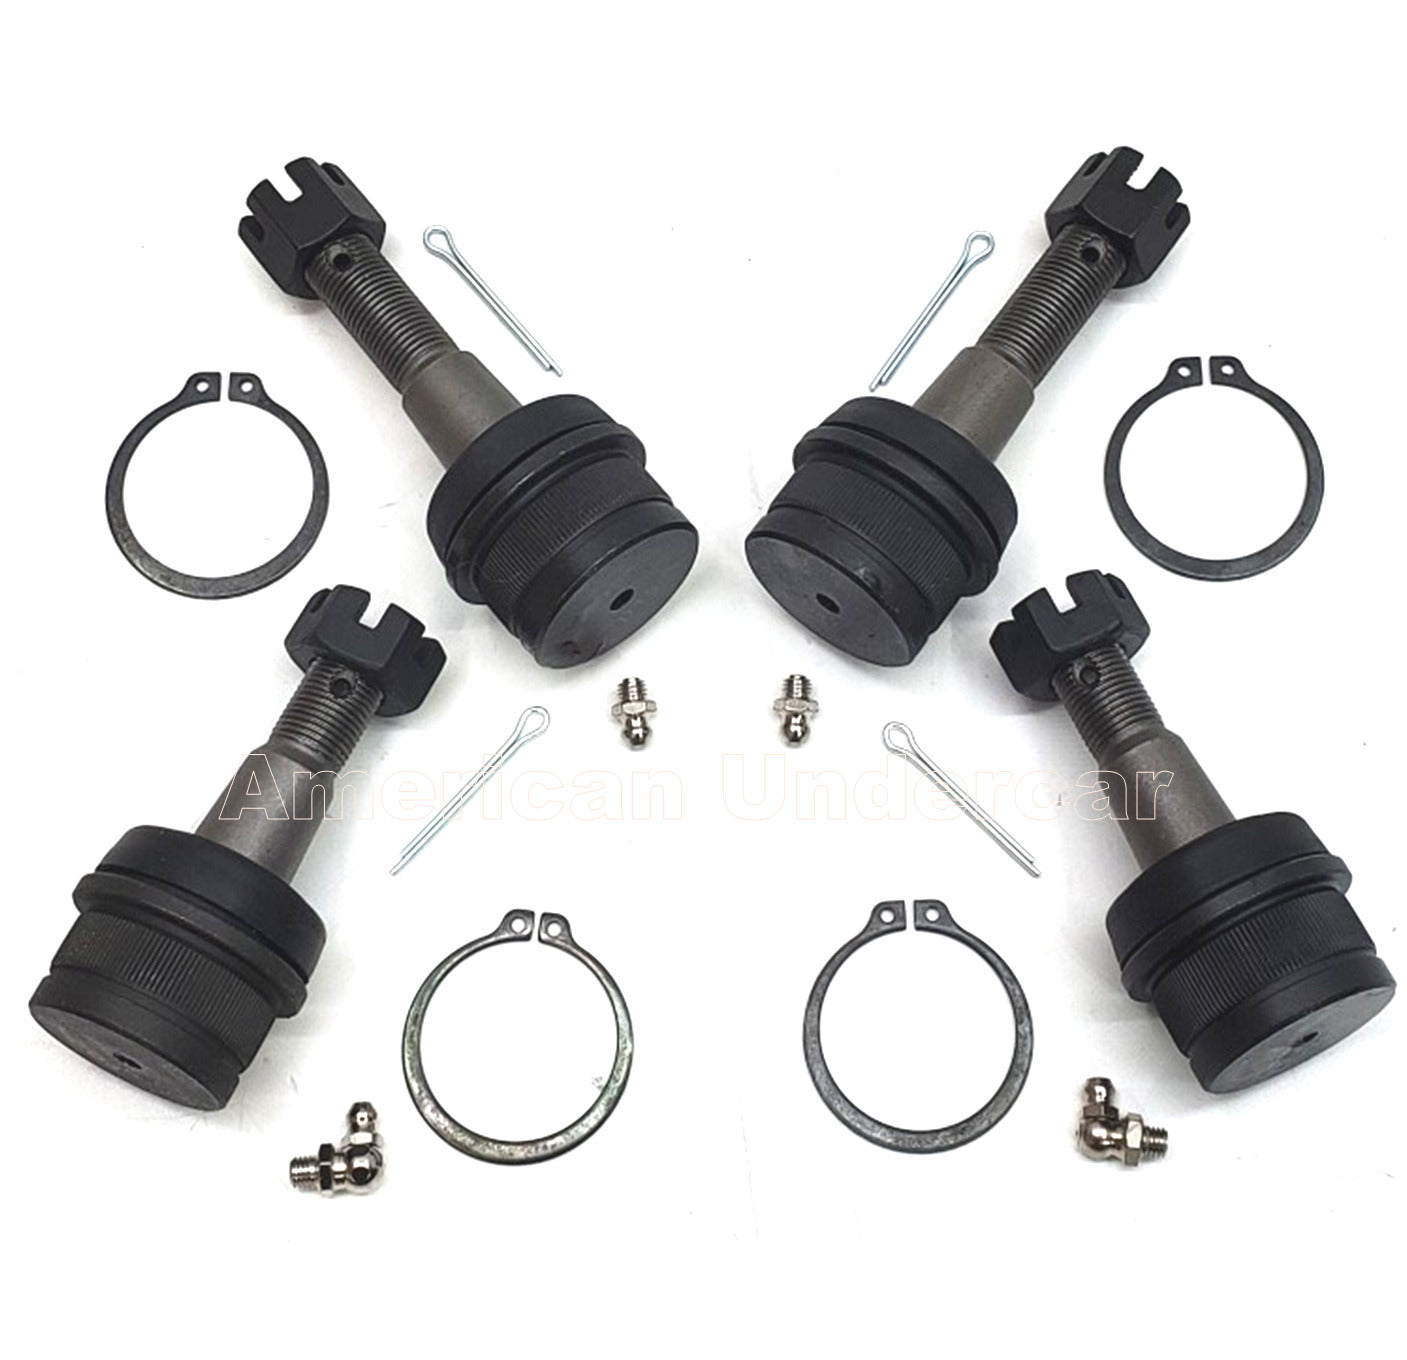 XRF Ball Joint Upper and Lower Suspension Kit for 1983-1997 Ford Ranger 4x4